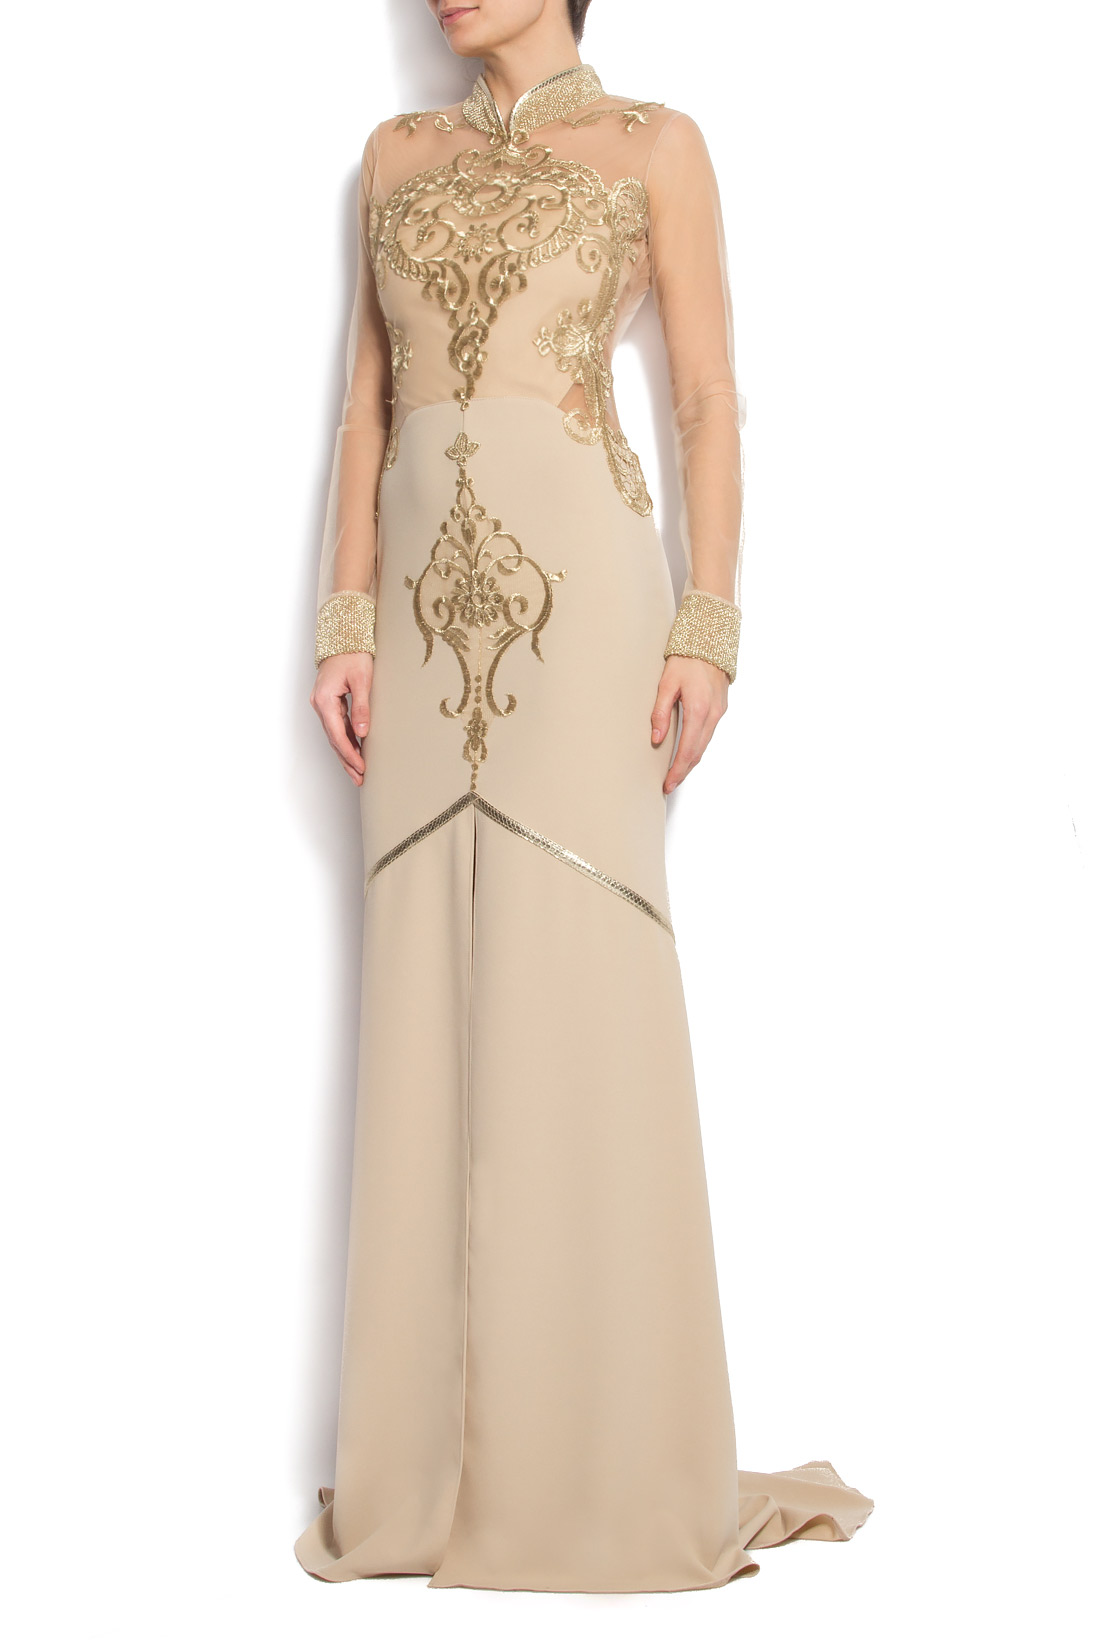 Hand embroidered crepe gown Anca si Silvia Negulescu image 2